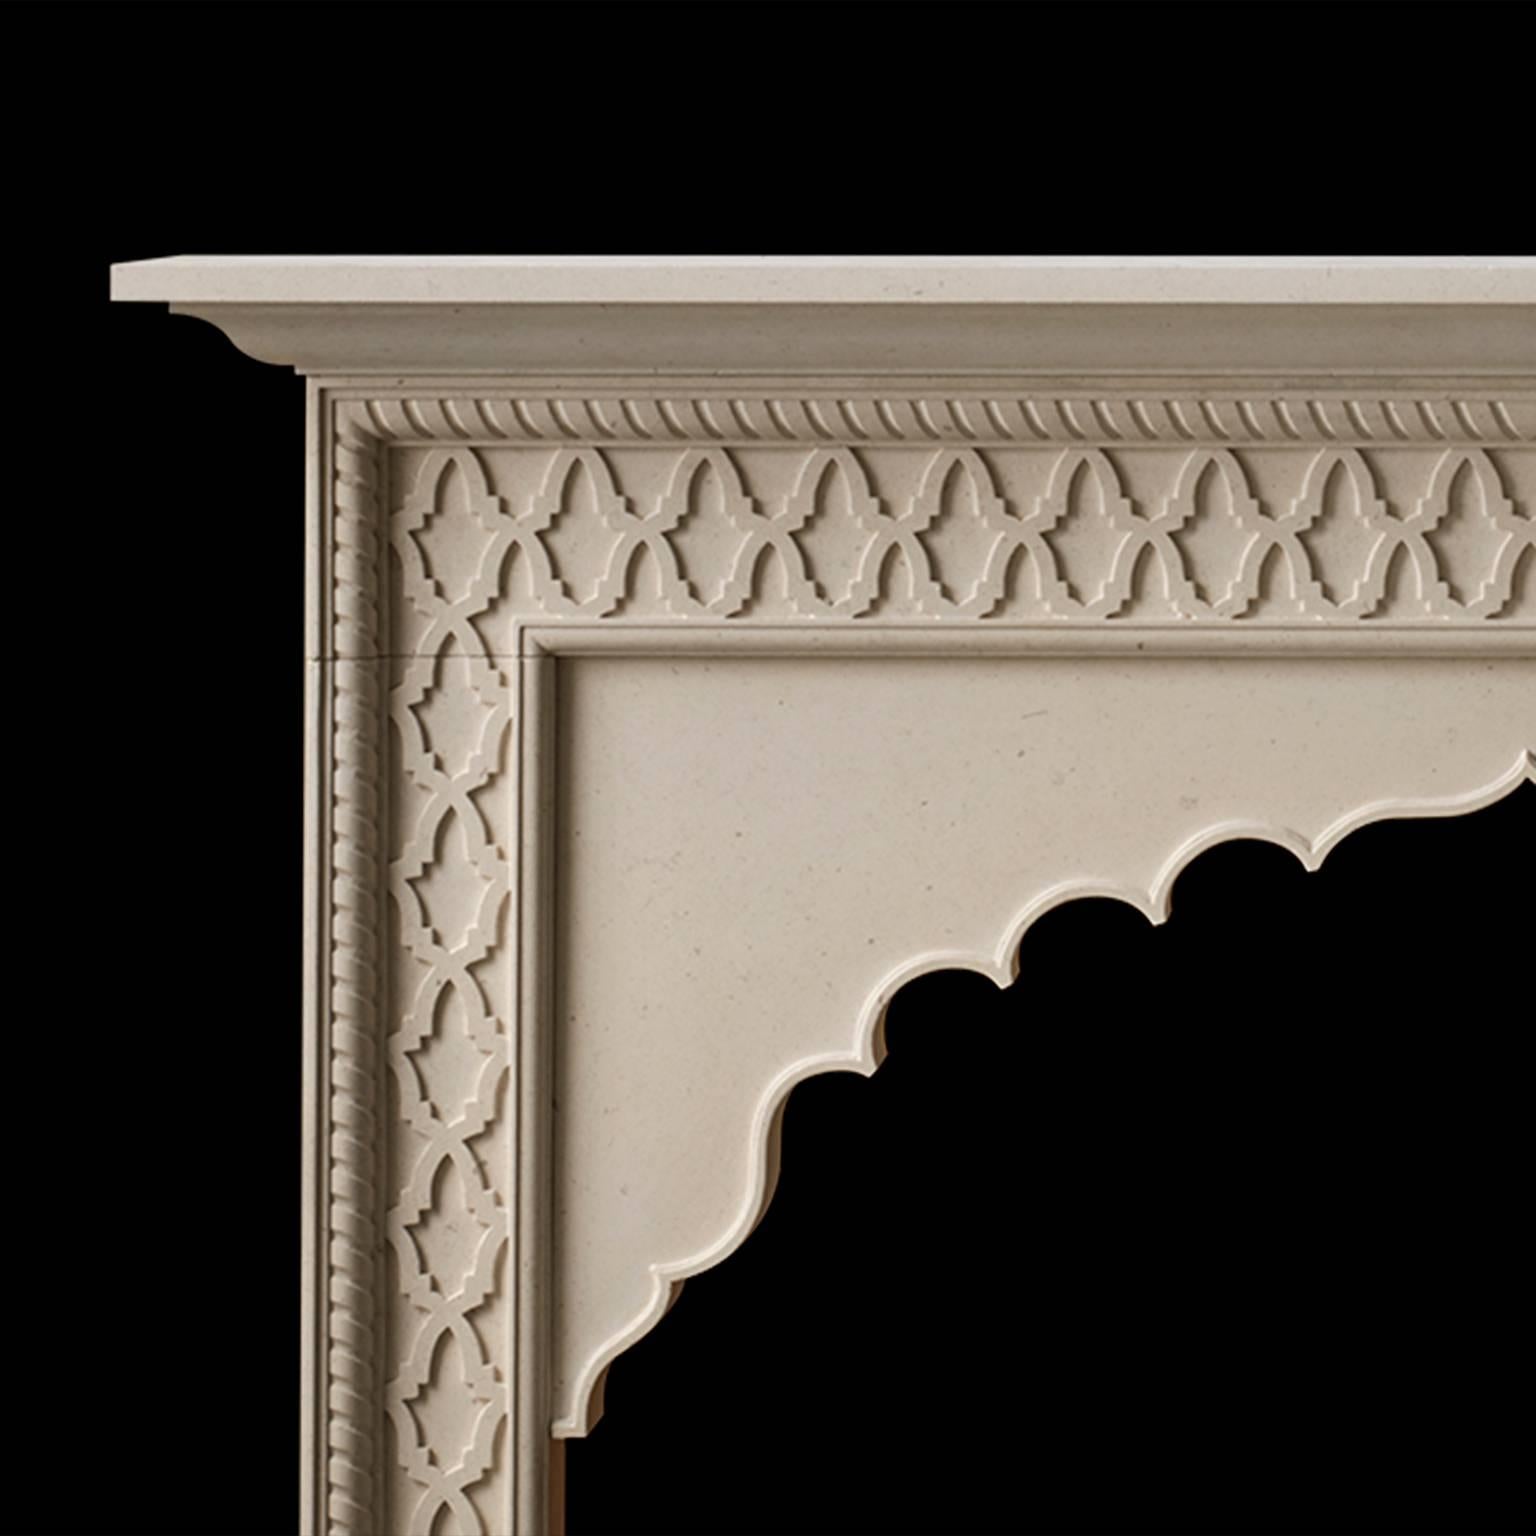 The Castello, from Chesney's Alexa Hampton Collection. Inspired by the Moorish architecture of the Castle of Sammezano in Tuscany, the Castello is hand-carved in Cabouca limestone with interlacing lattice work and a multifoil arch.

Opening